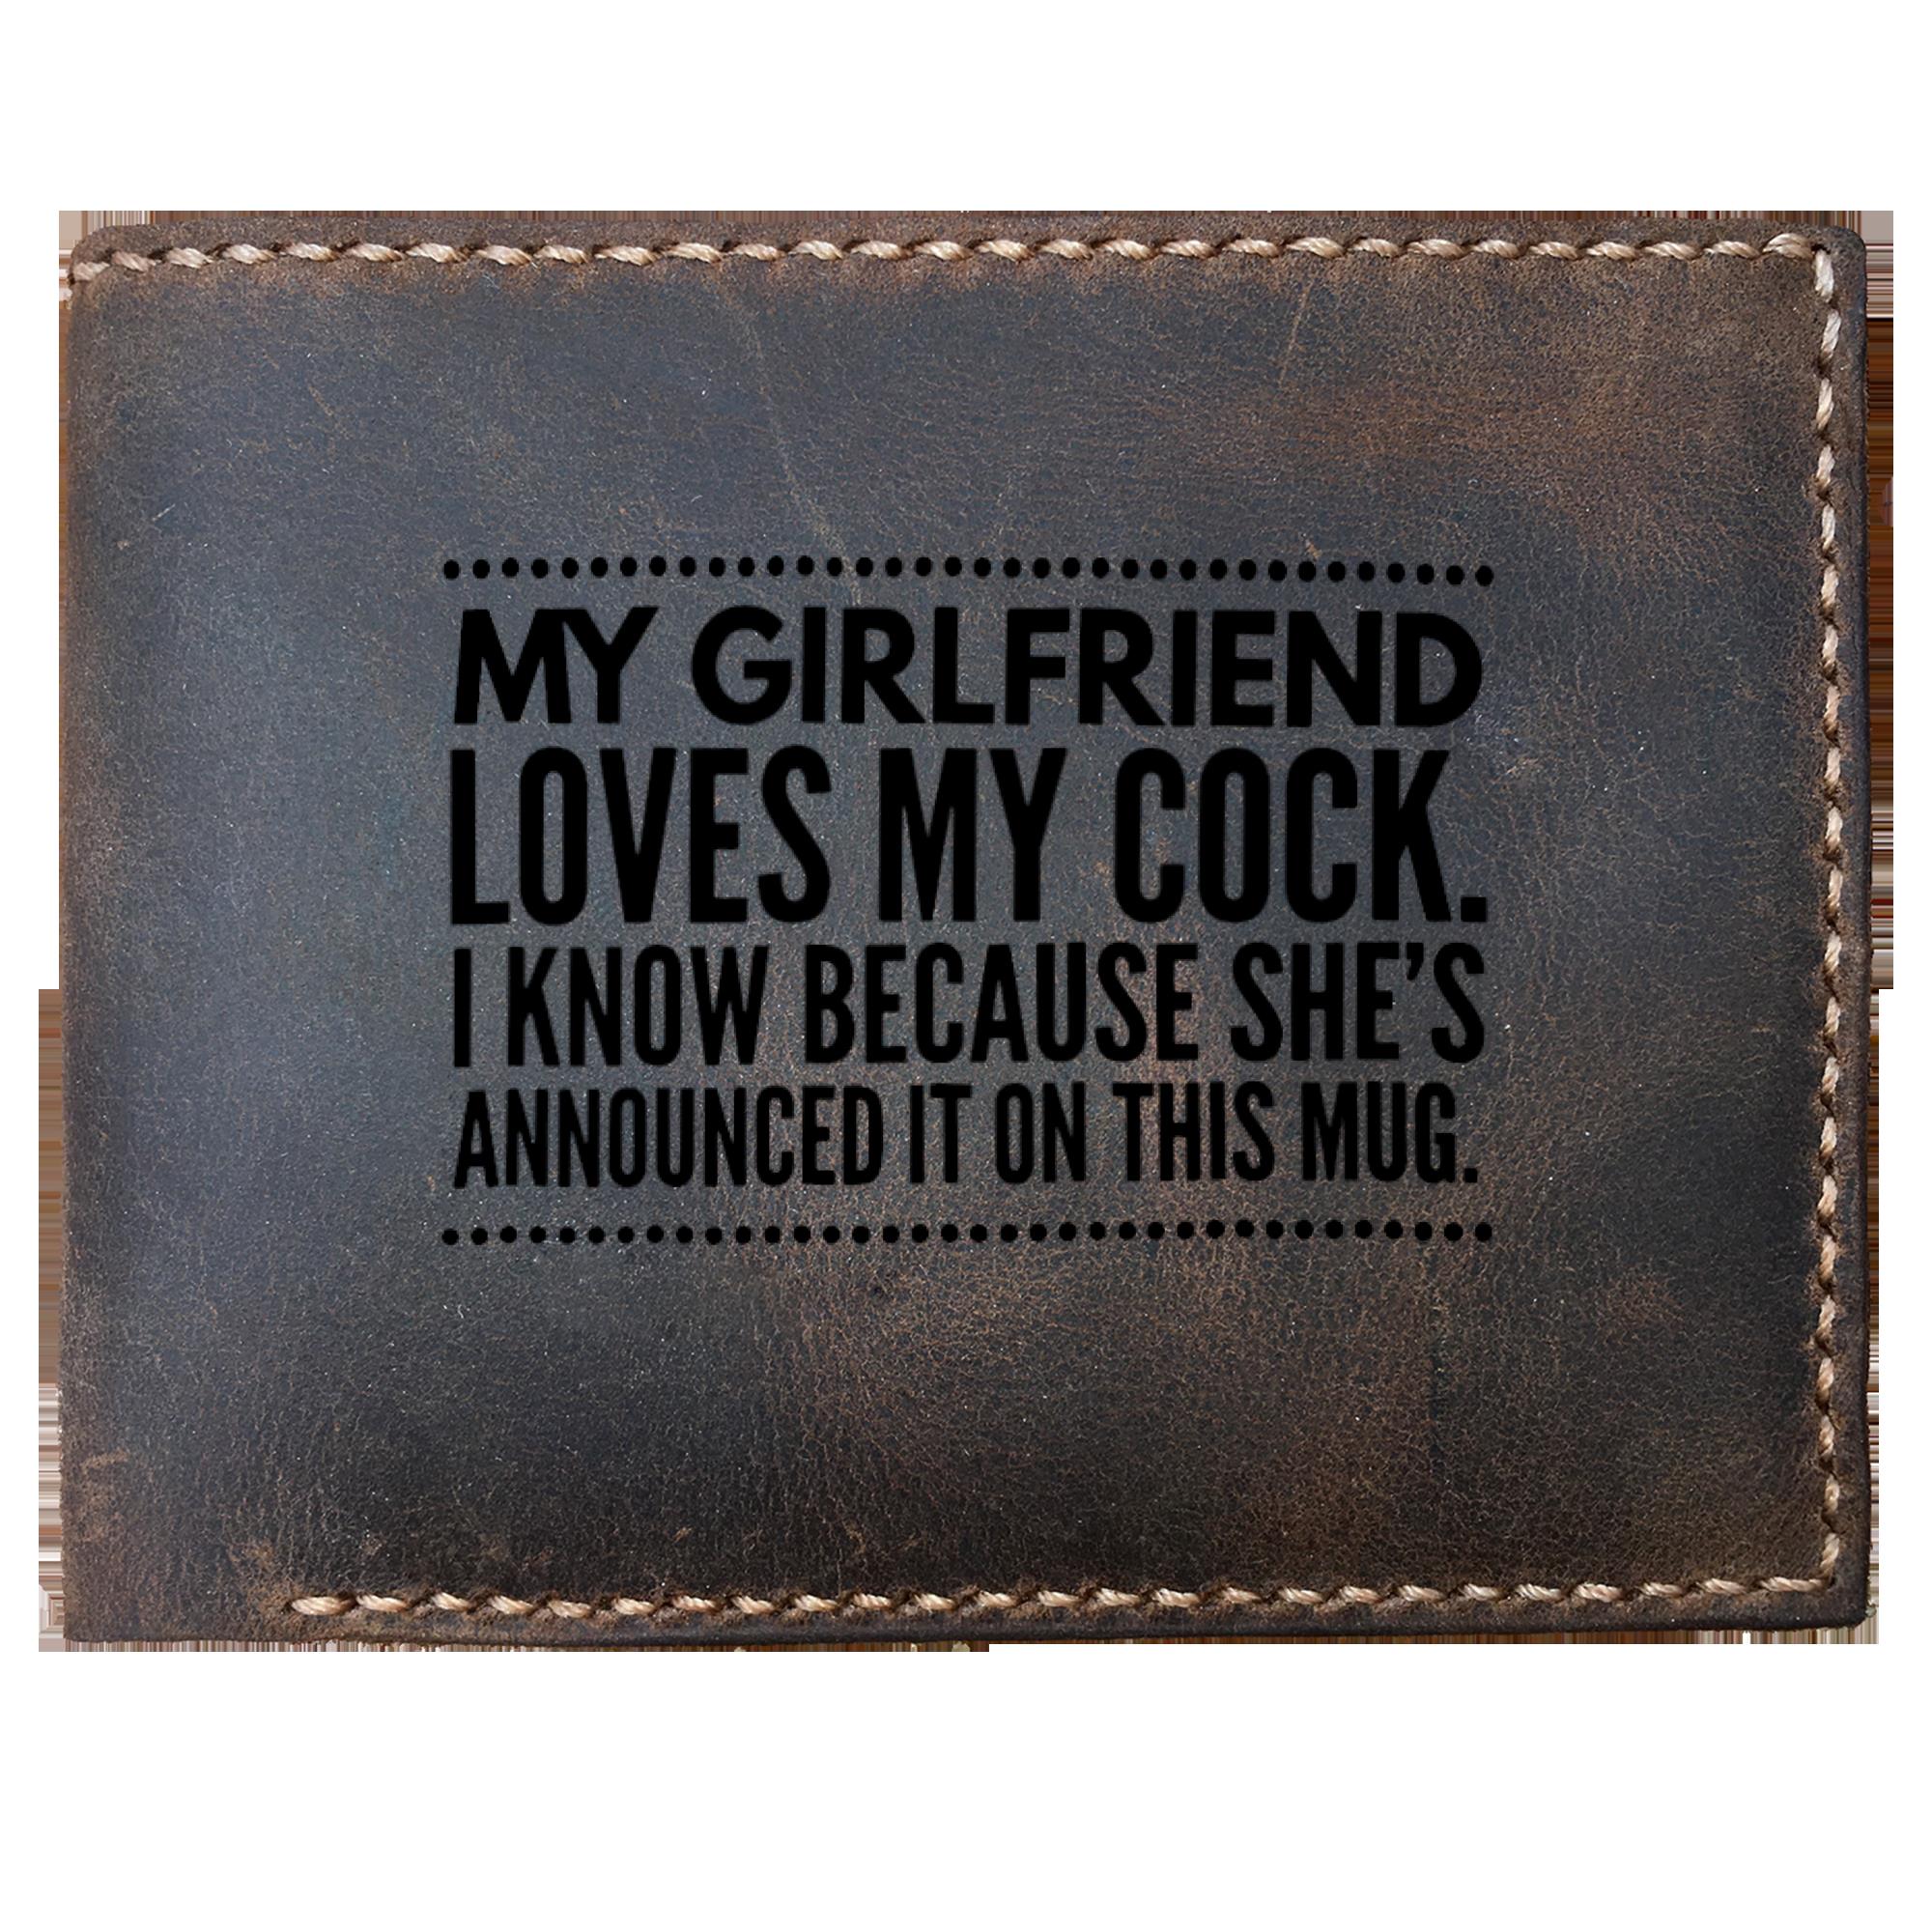 Skitongifts Funny Custom Laser Engraved Bifold Leather Wallet For Men, Compliment Your Boyfriend With I Love Your Cock So Much I Announced It On This